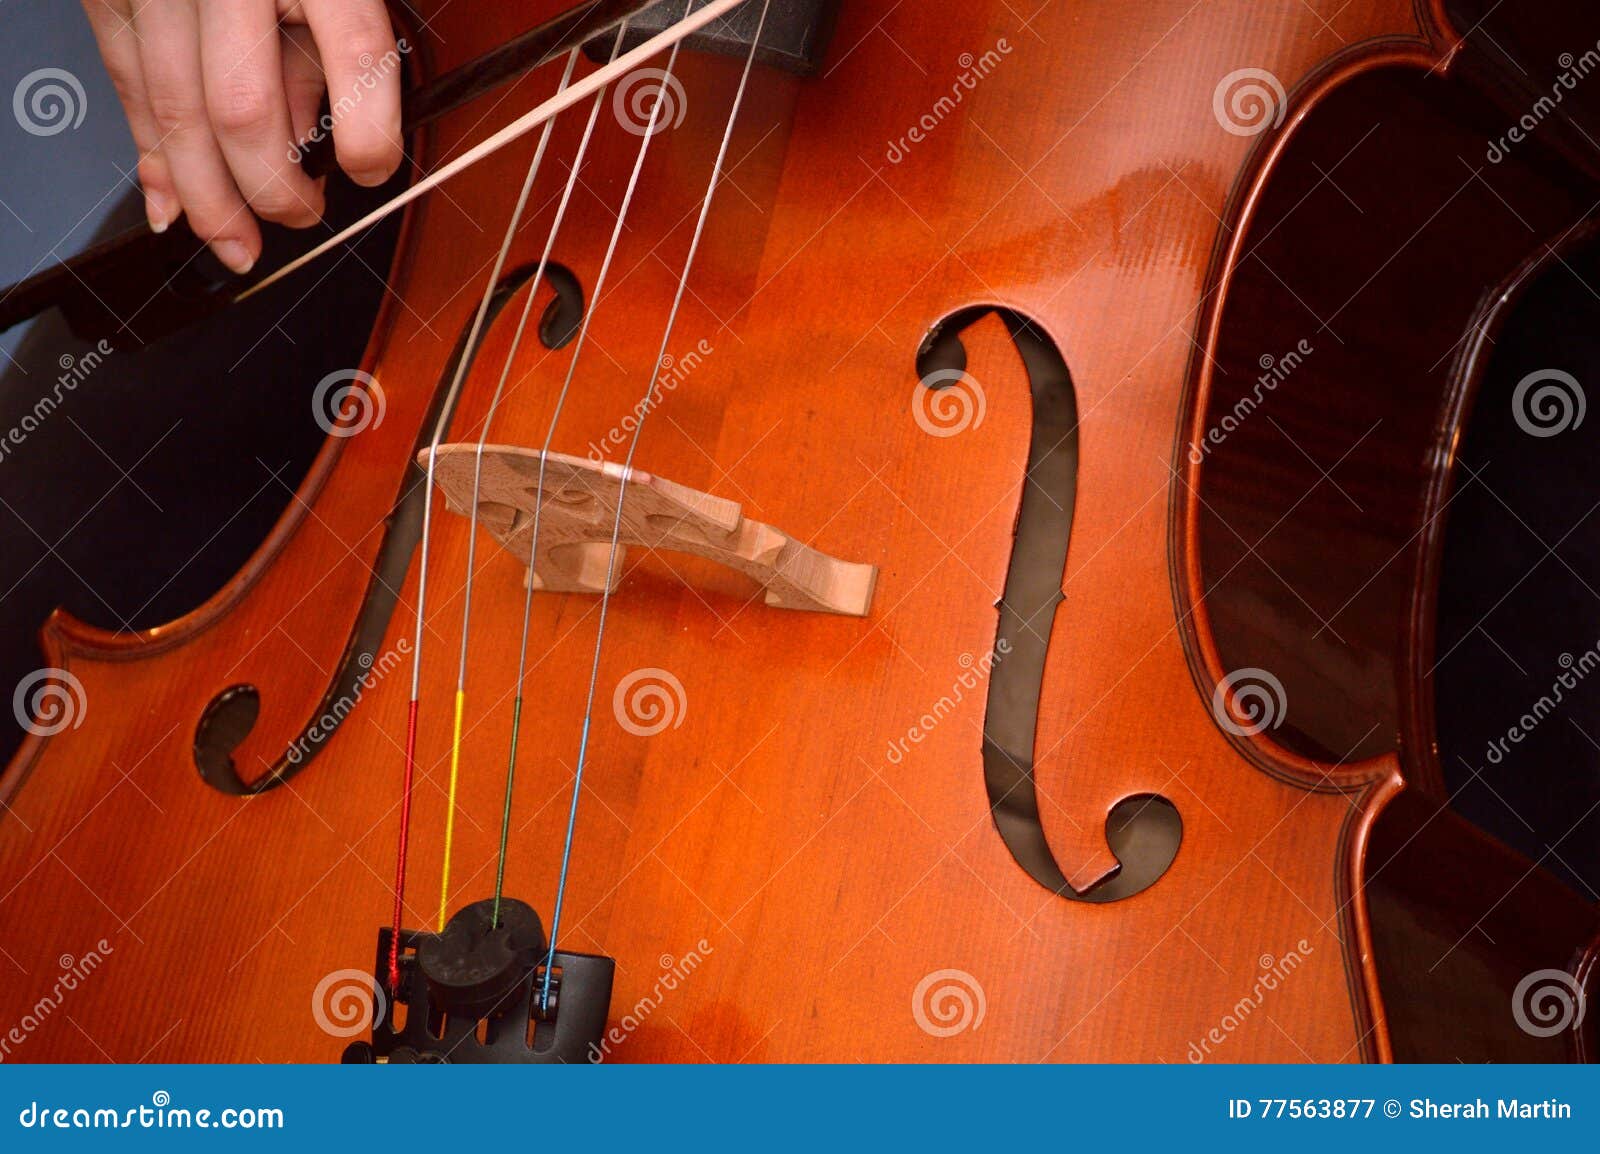 cellist playing cello